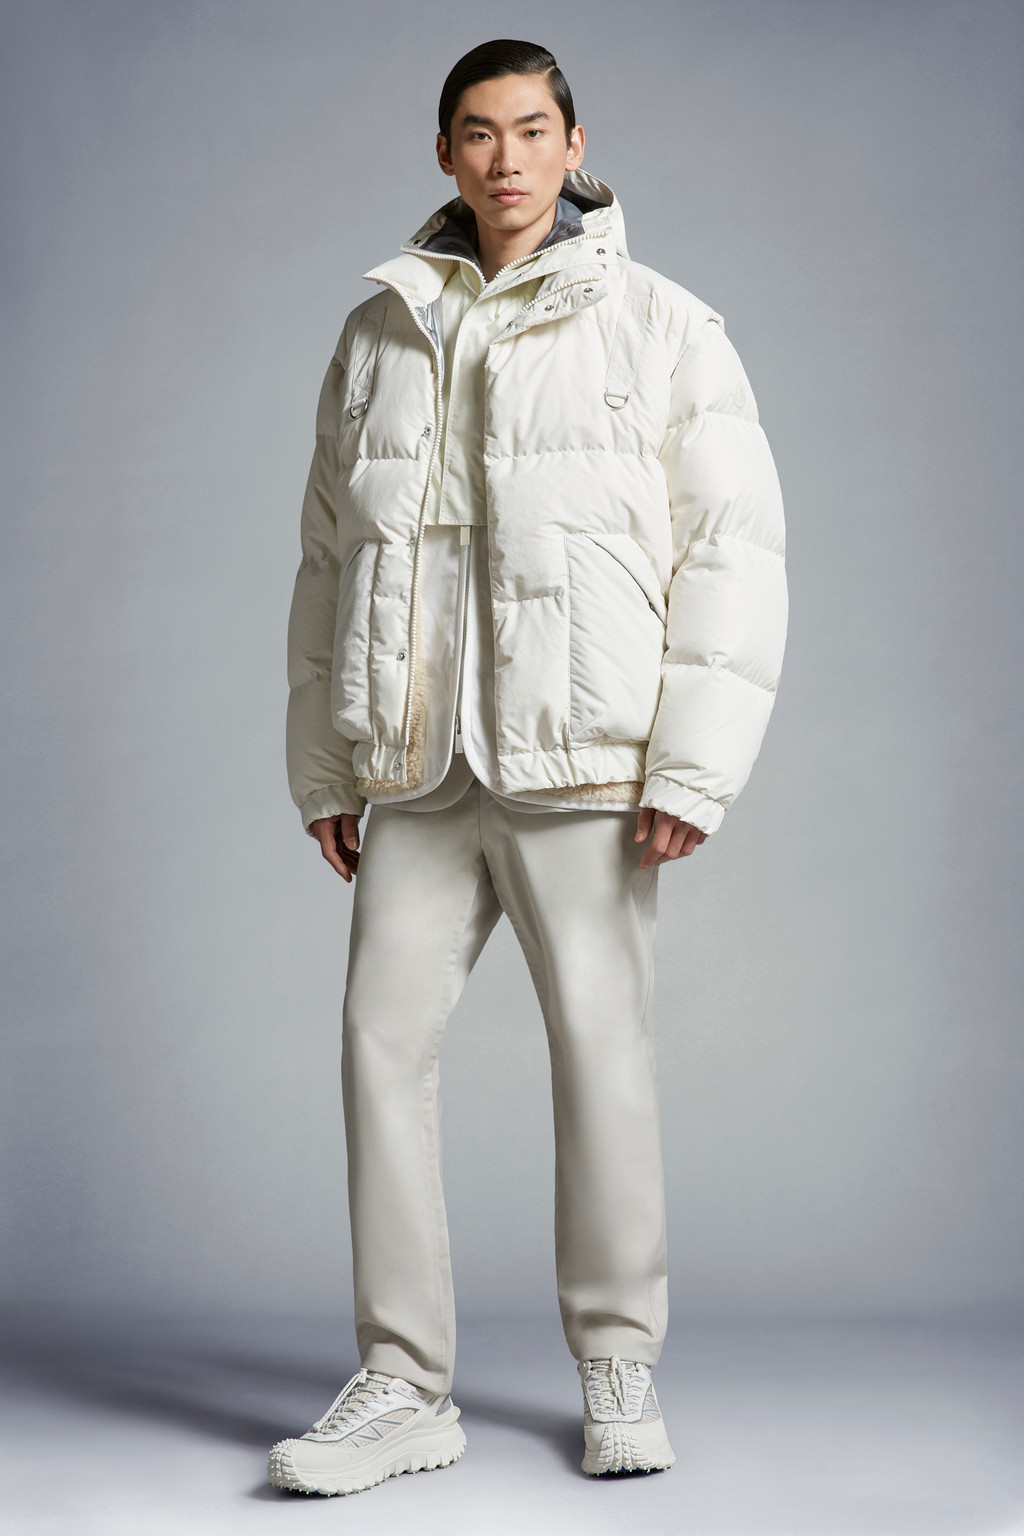 For Special Projects - Moncler x Sacai | Moncler GR